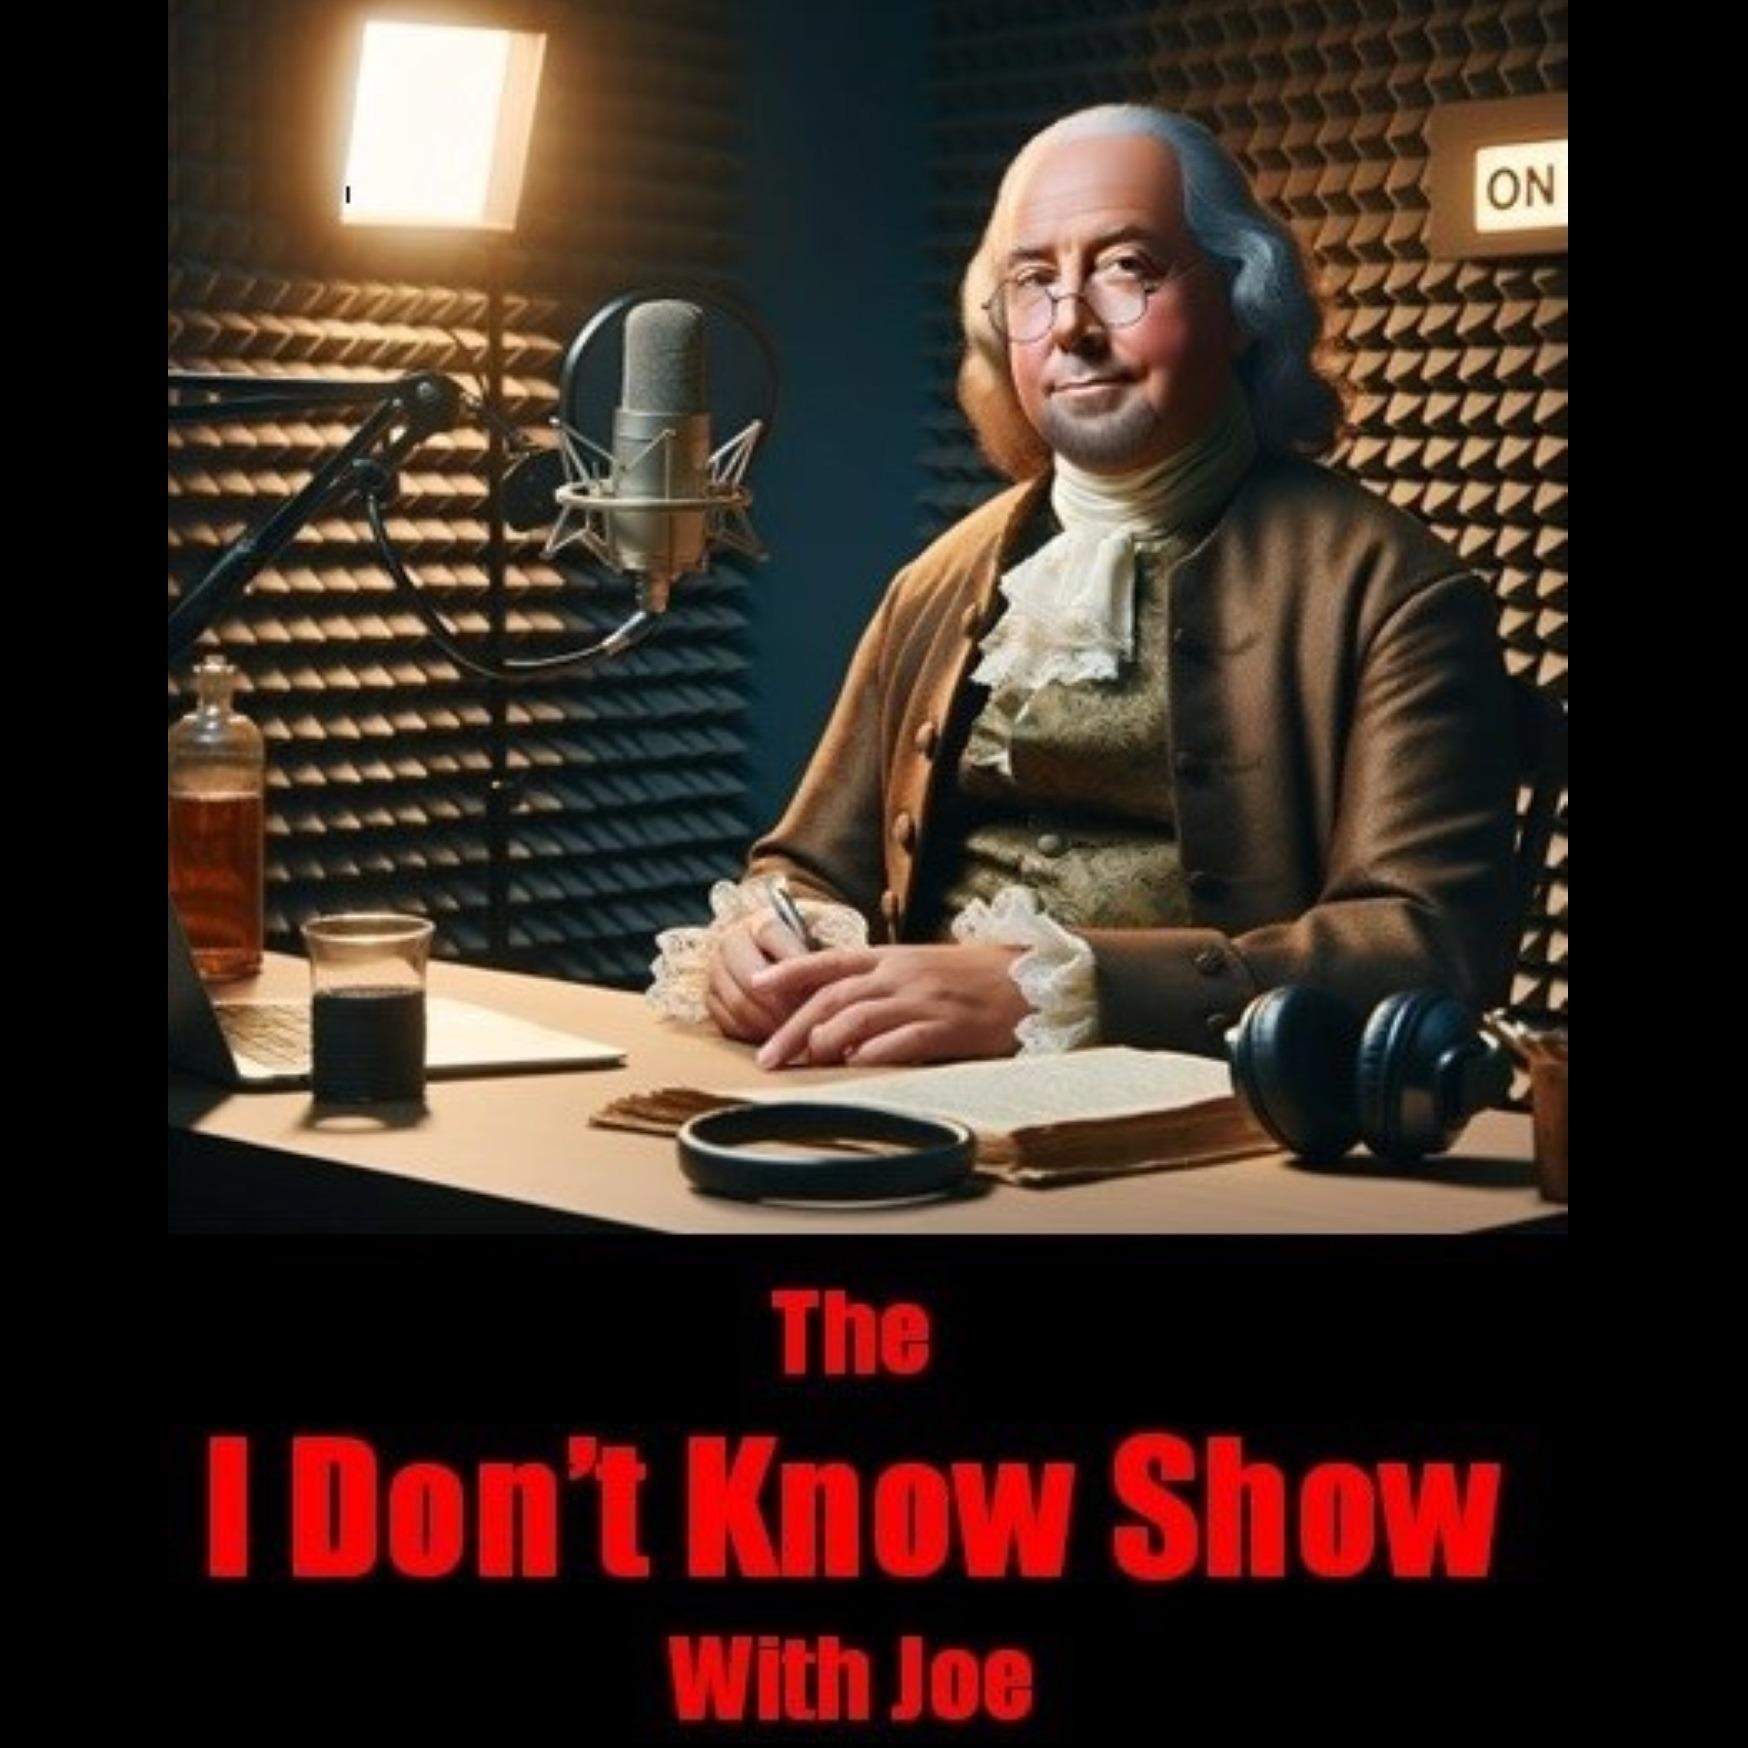 The I Don't Know Show with Joe